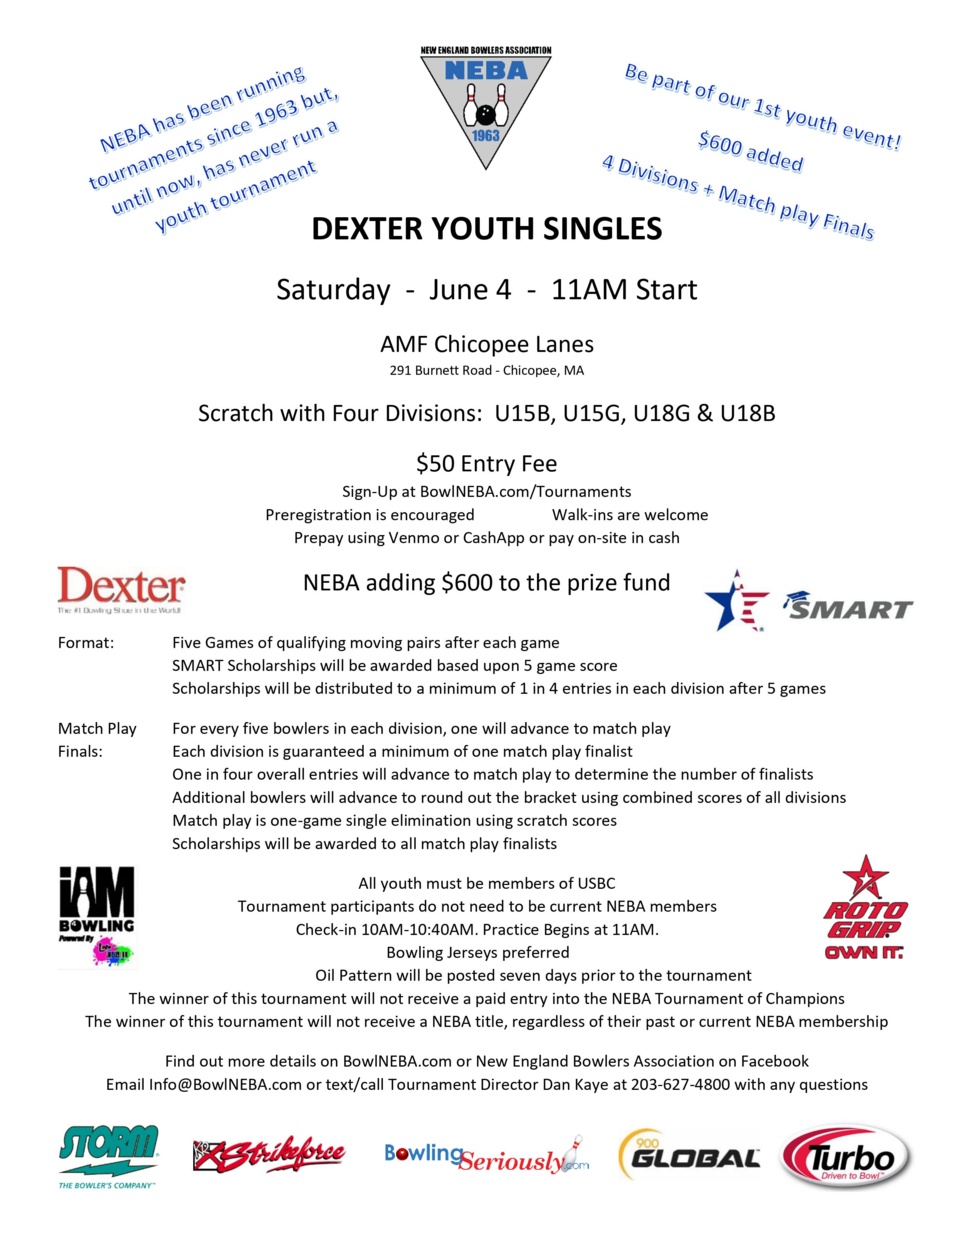 NEBA's 1st Youth Tournament is in 10 Days